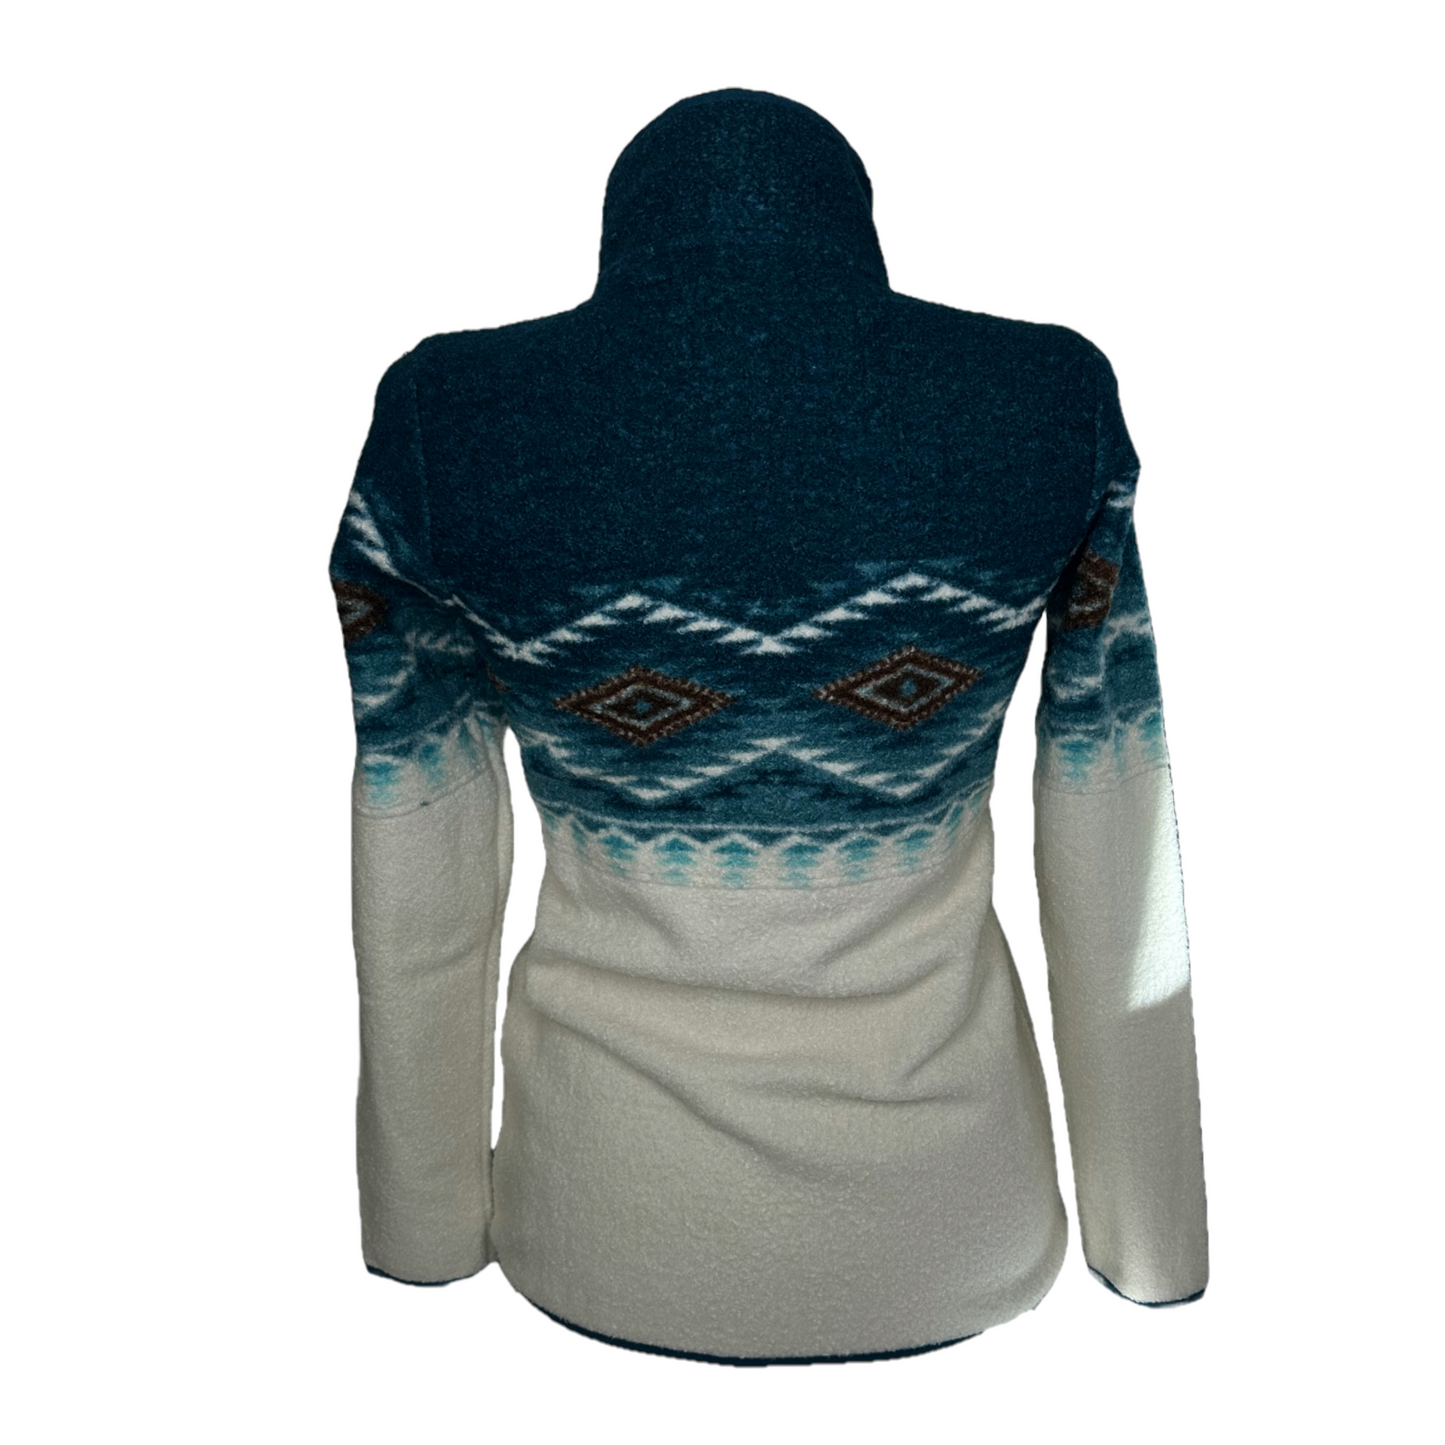 Powder River Outfitters Ladies Aztec Border Caribbean Pullover DW91C01841